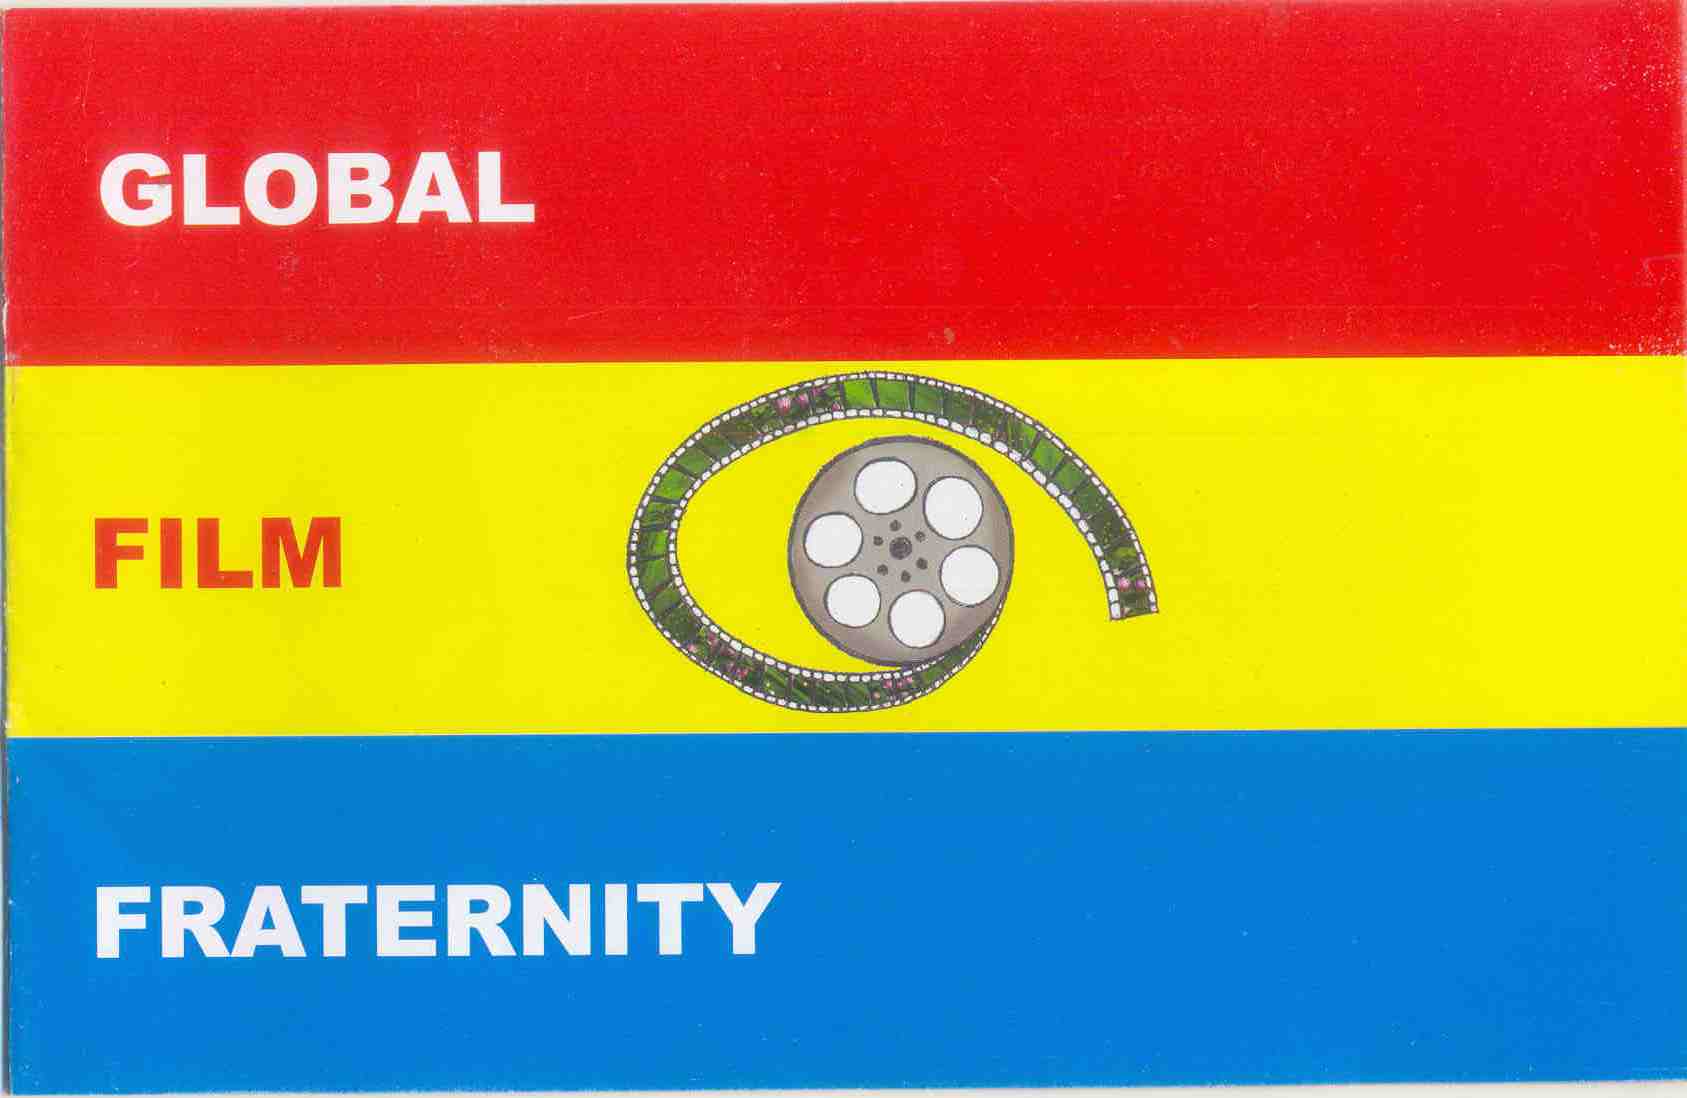 ‘FIRST TO DESIGN A FLAG FOR THE WORLD CINEMA’